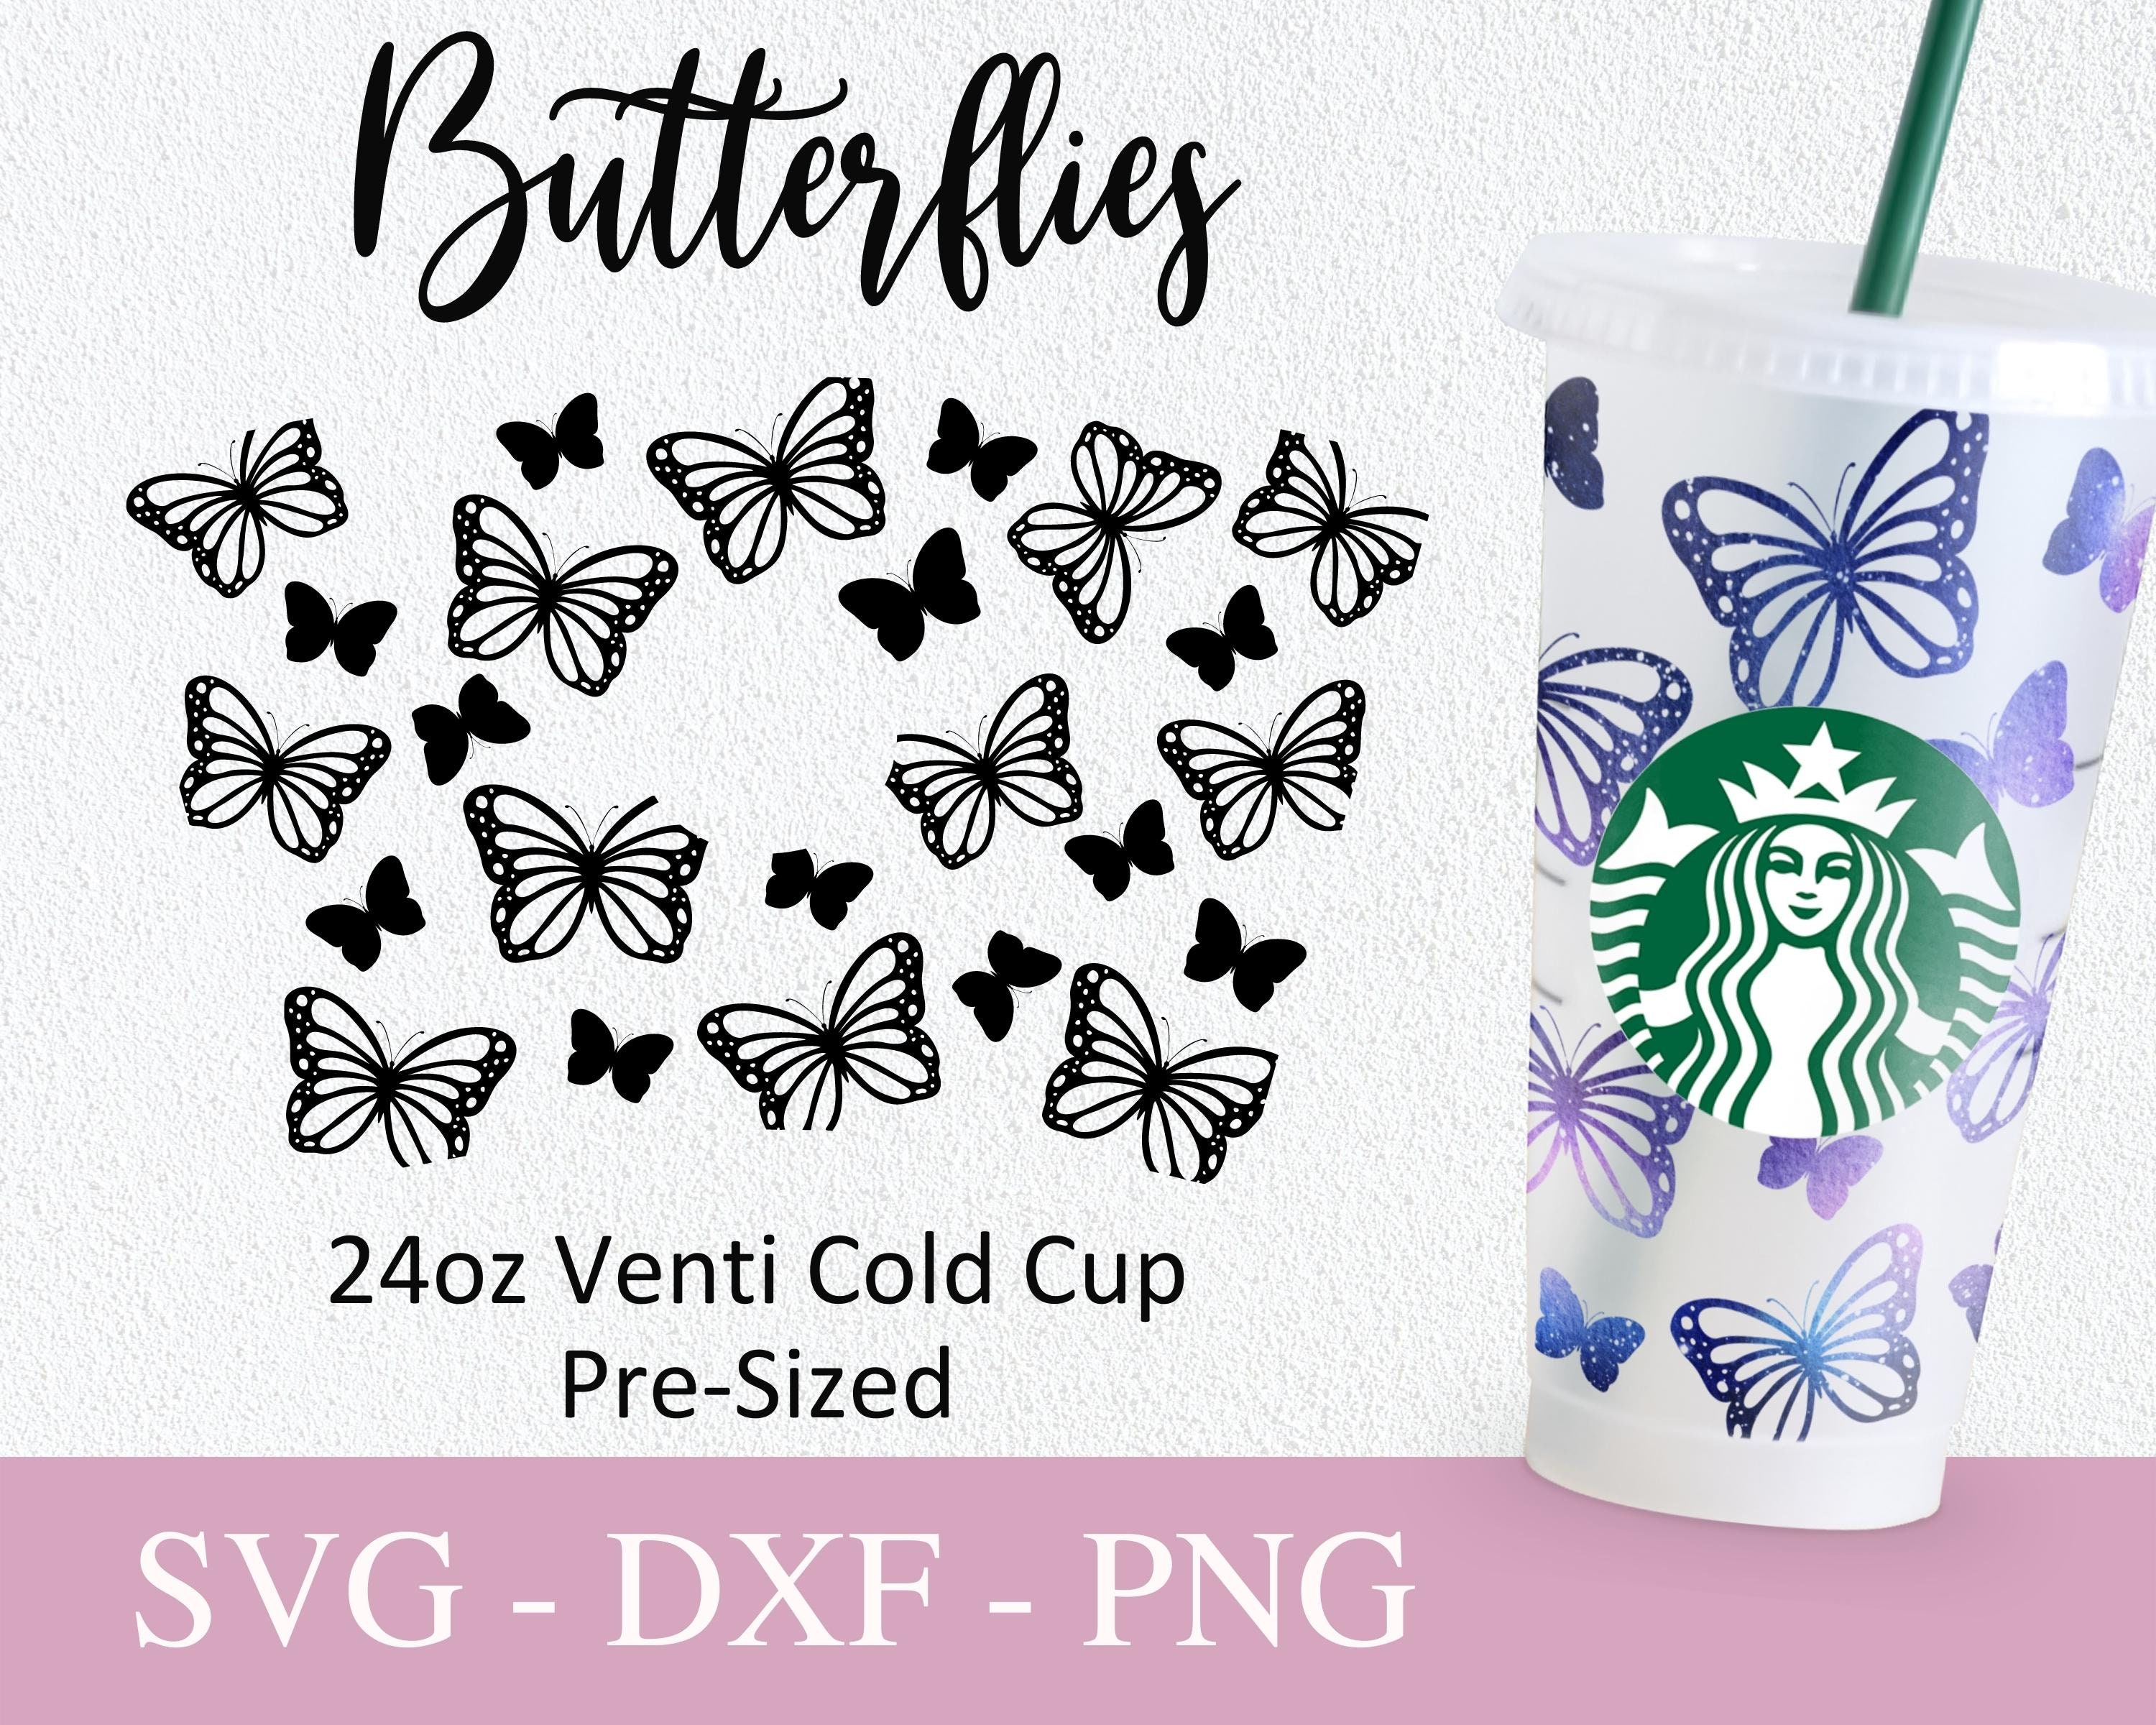 Pattern Starbucks Cup Svg – Starbucks Cold Cup Wrap SVG, Full Wrap For  Personalized Starbucks Cups, Cricut Cut Files